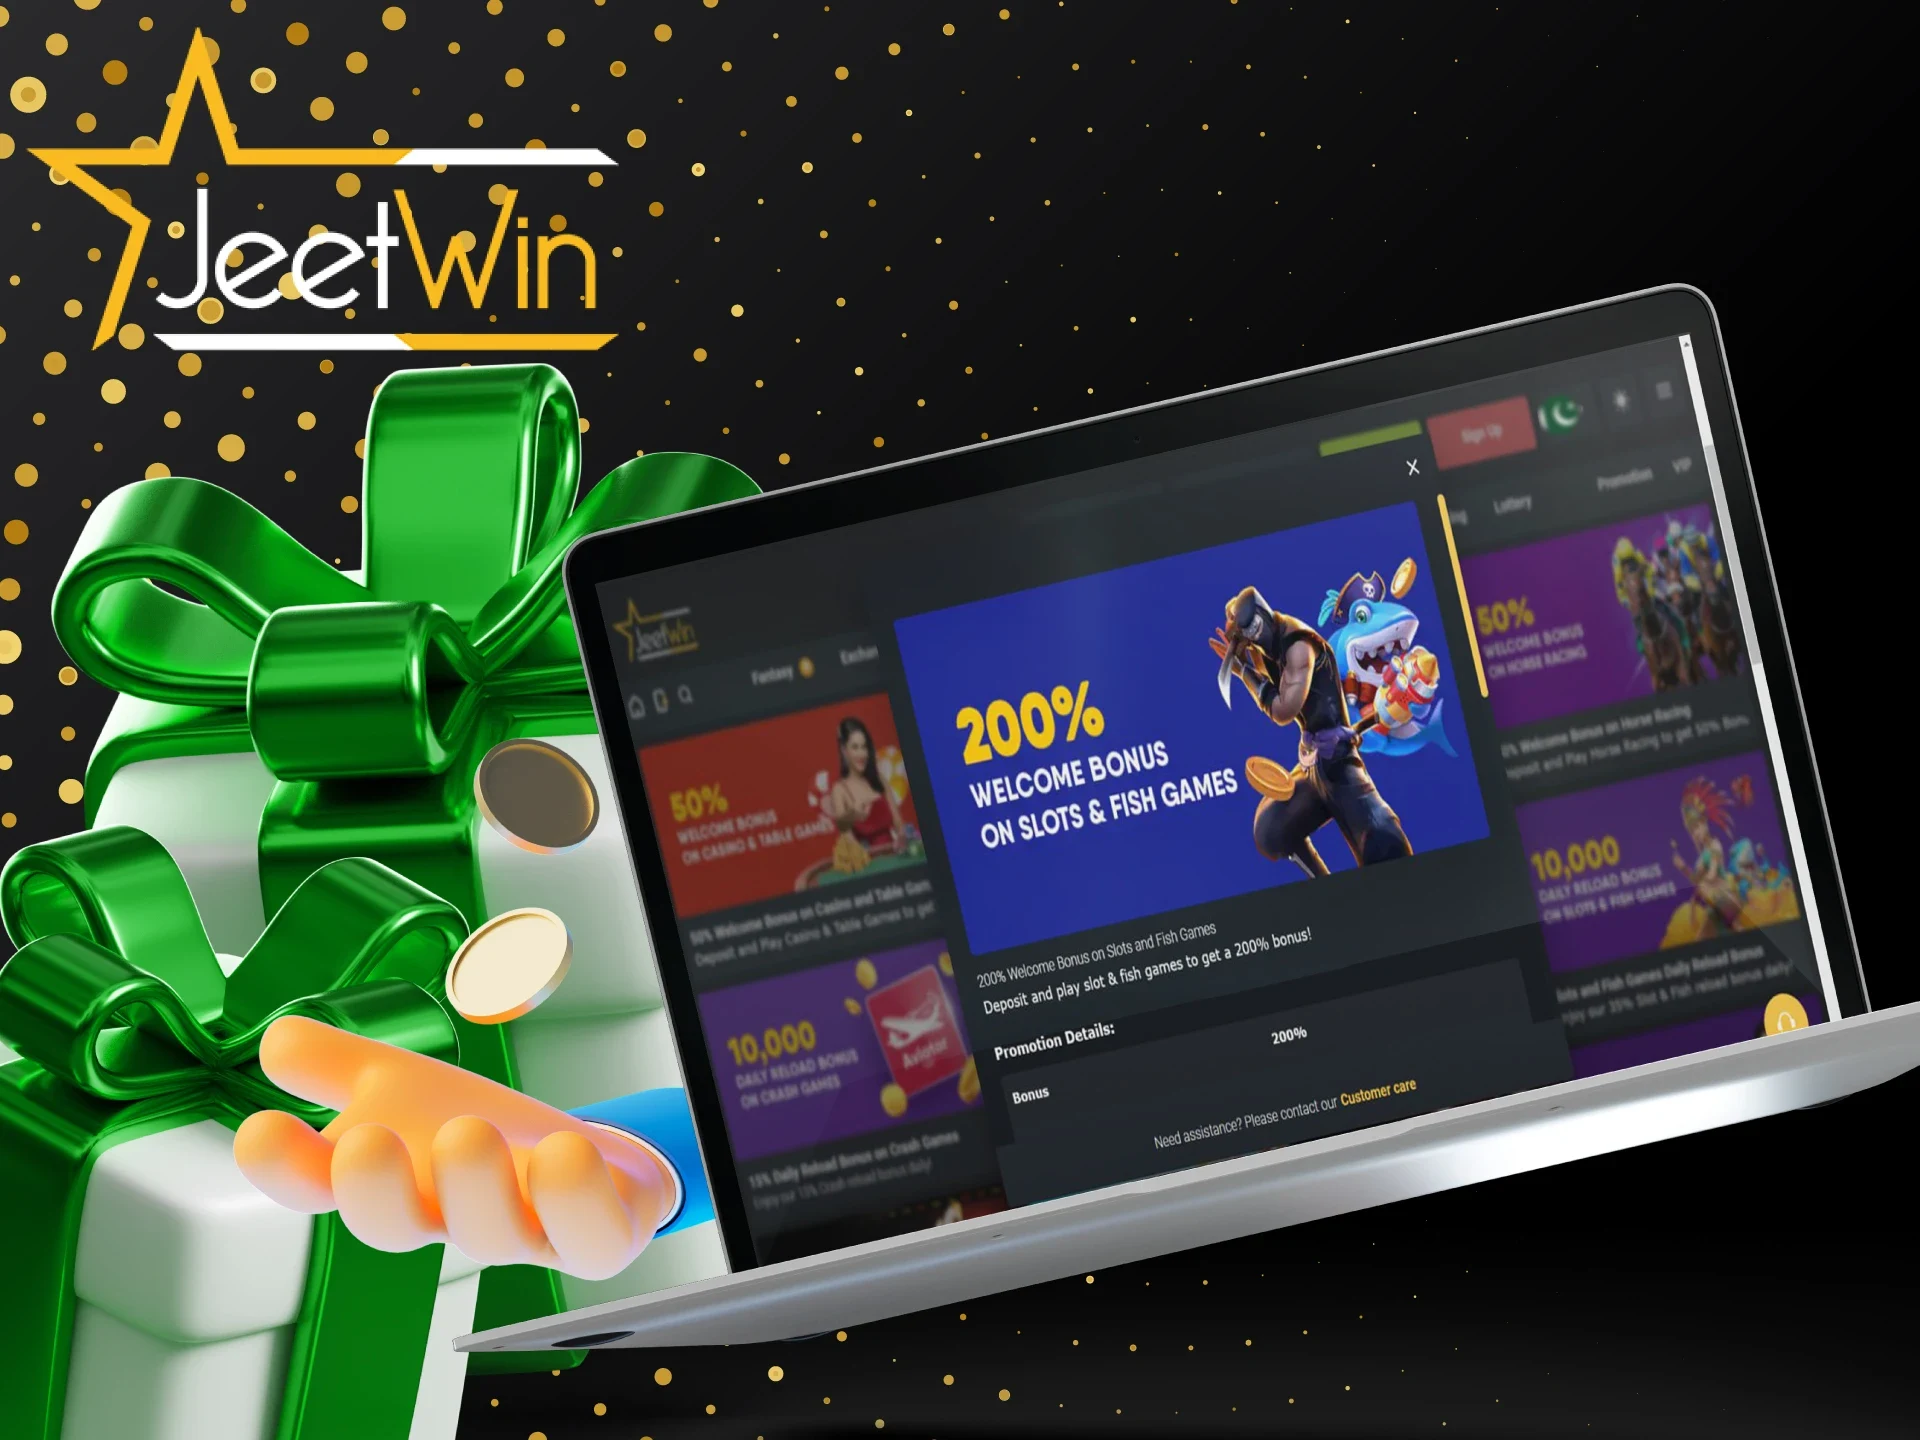 Claim your JeetWin welcome bonus and have an unforgettable experience playing slots.